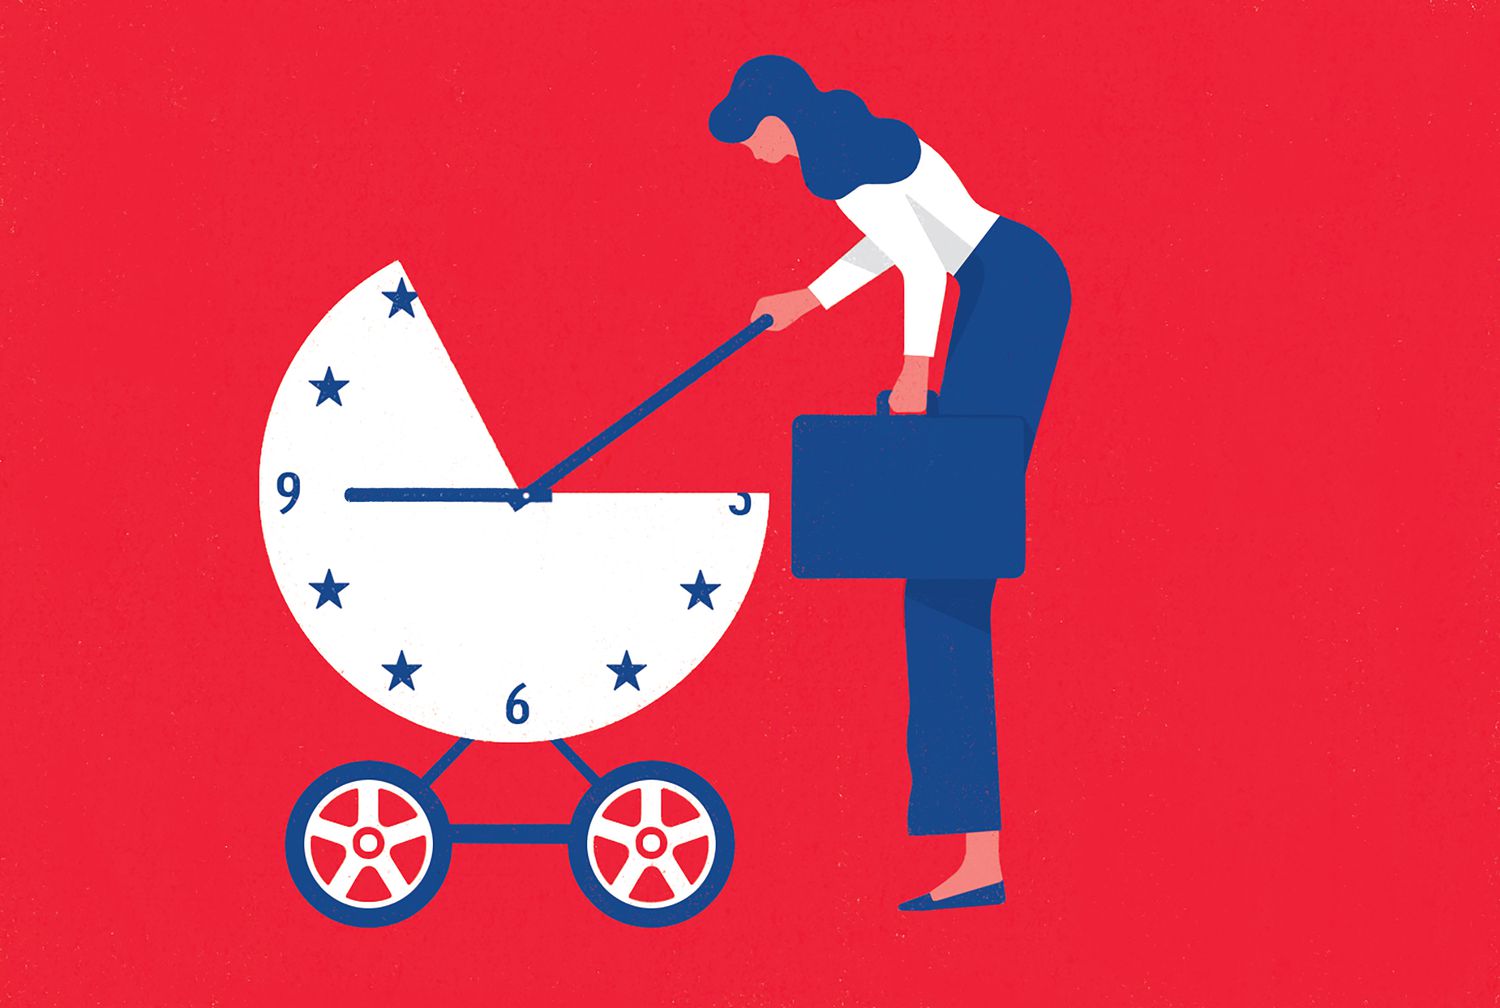 working mom says goodbye to her baby, who is in a stroller with a clock on it. the illustration is in red, white and blue